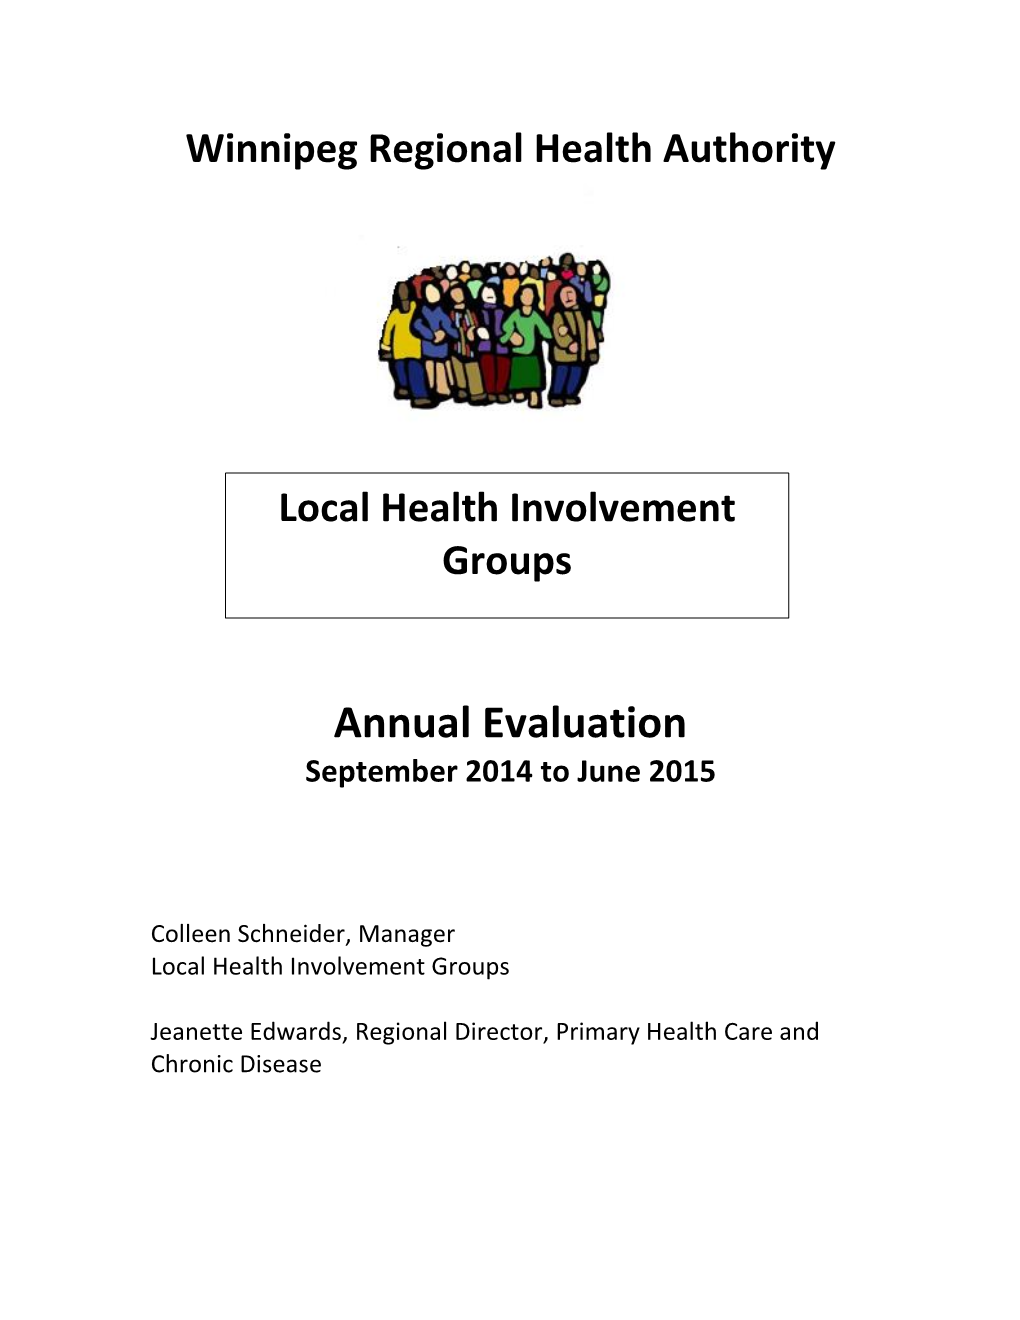 Annual Evaluation September 2014 to June 2015